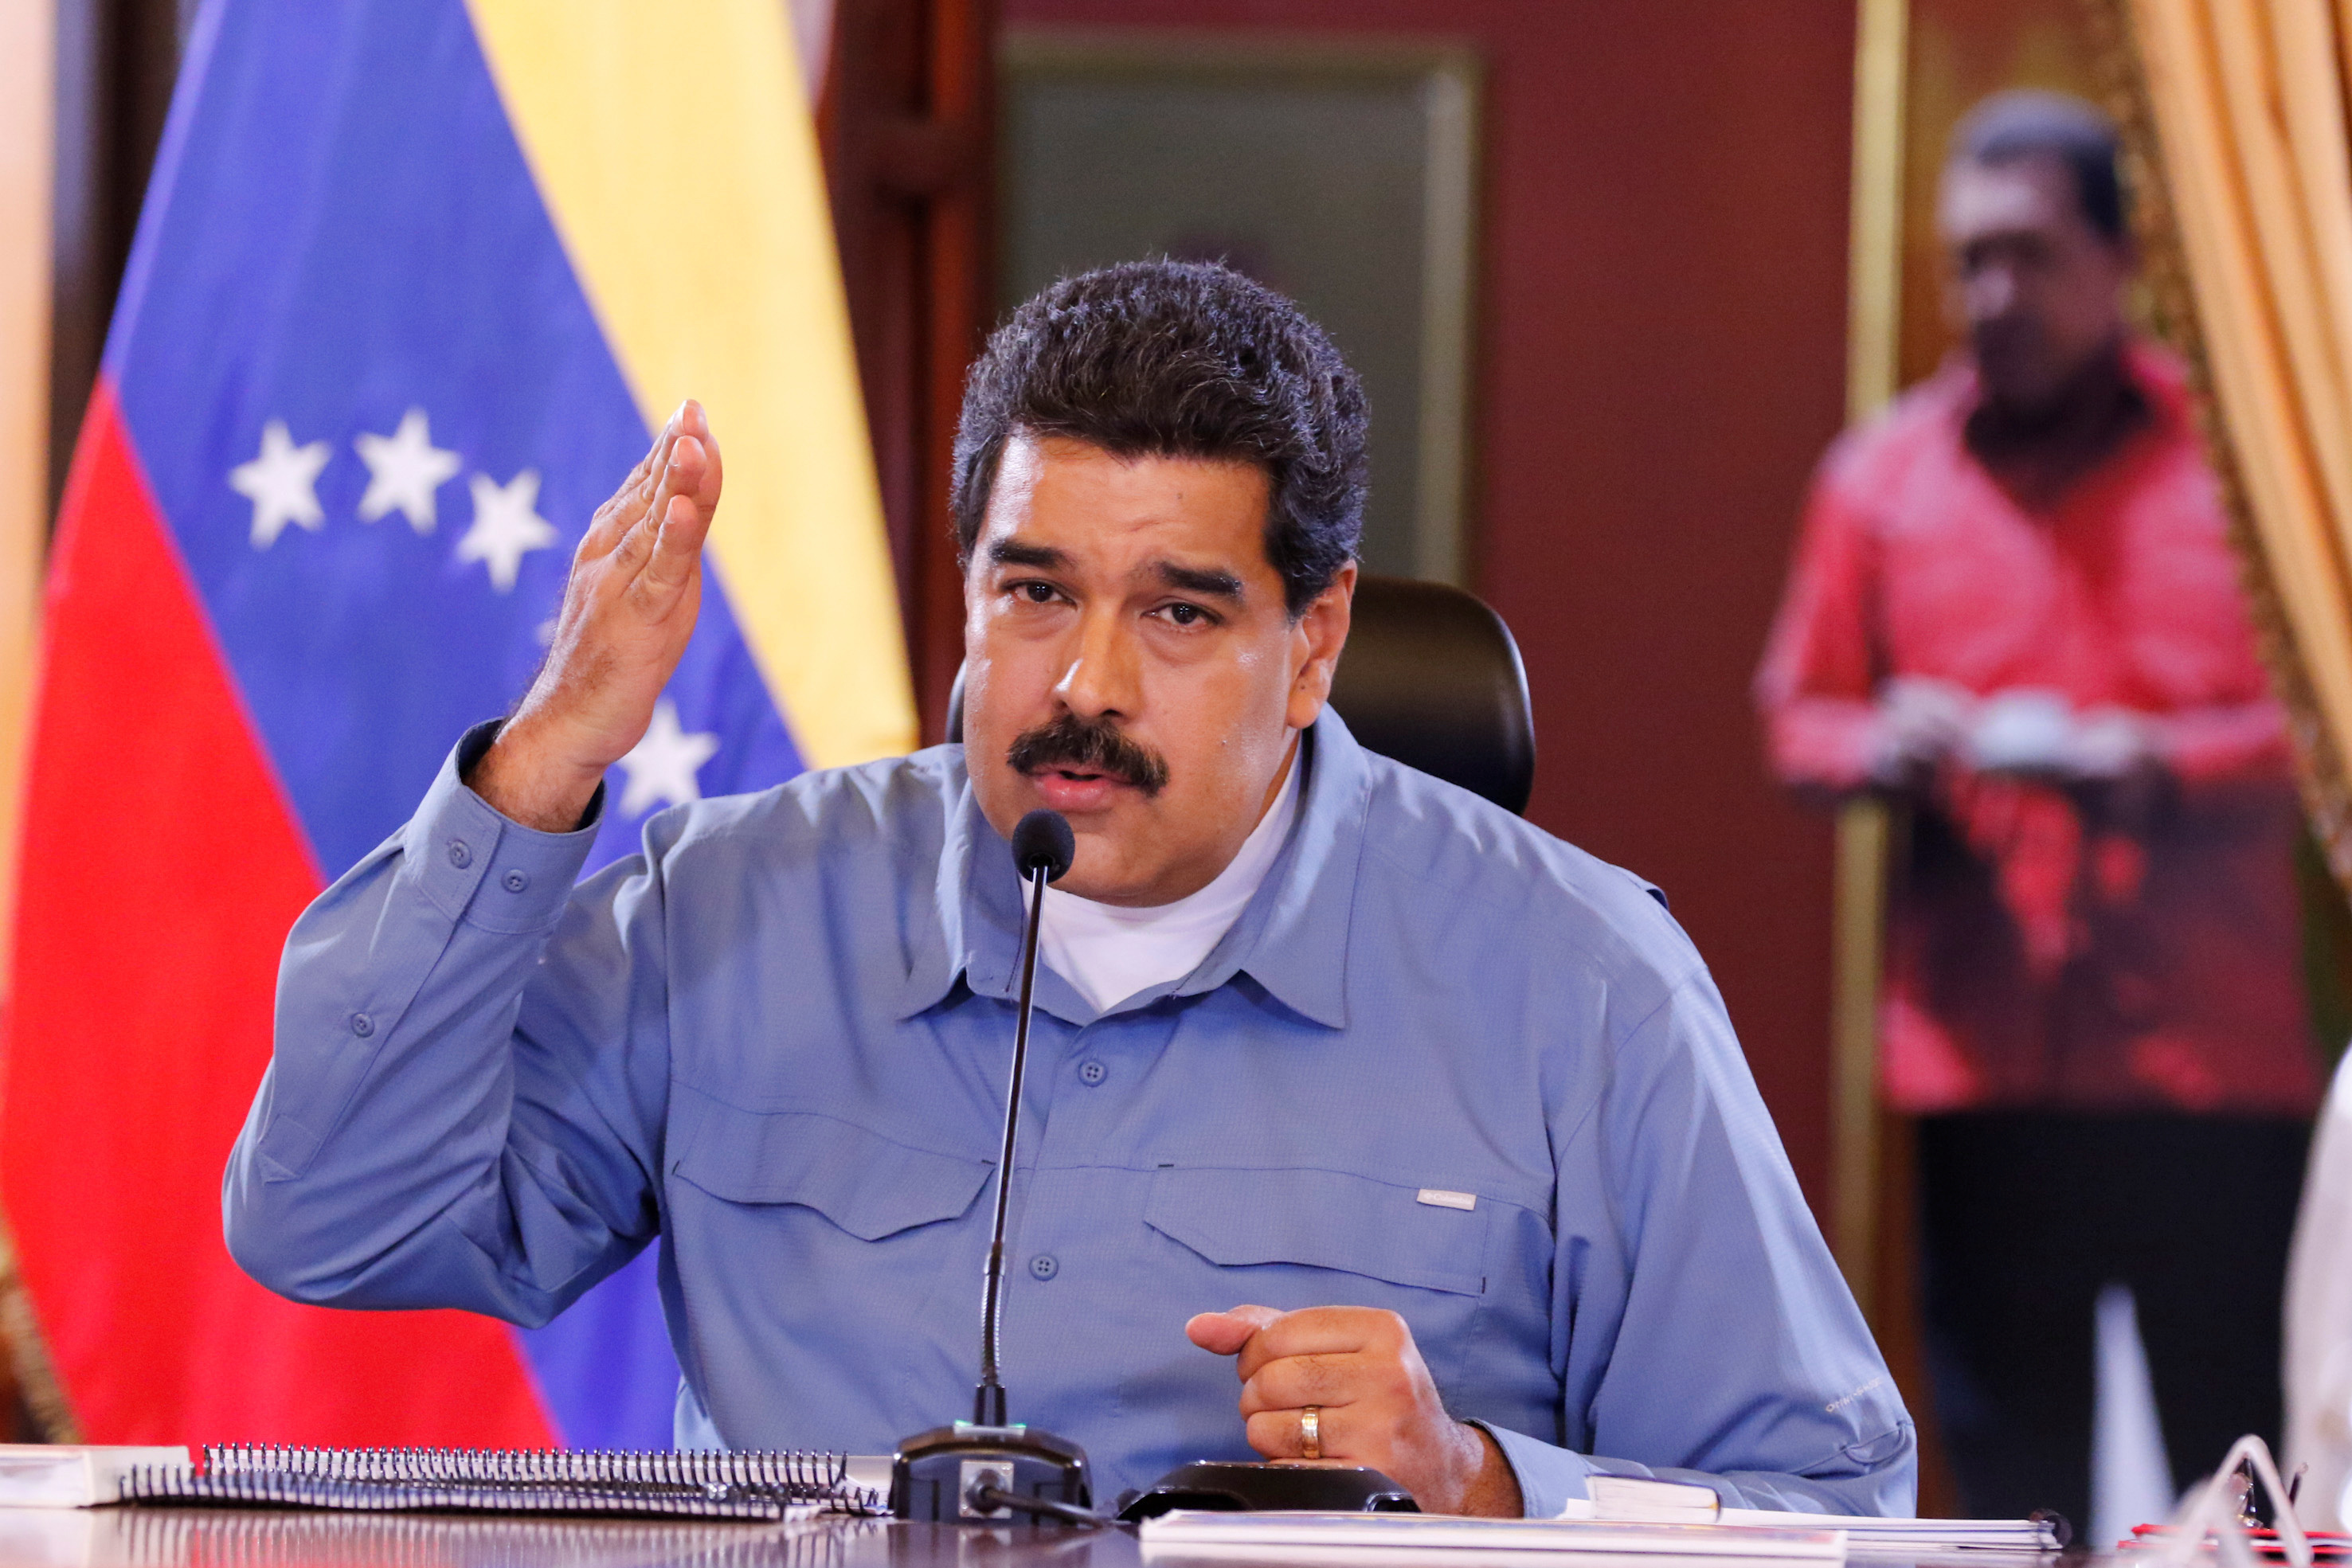 Venezuela's President Nicolas Maduro speaks during a Council of Ministers meeting at Miraflores Palace in Caracas